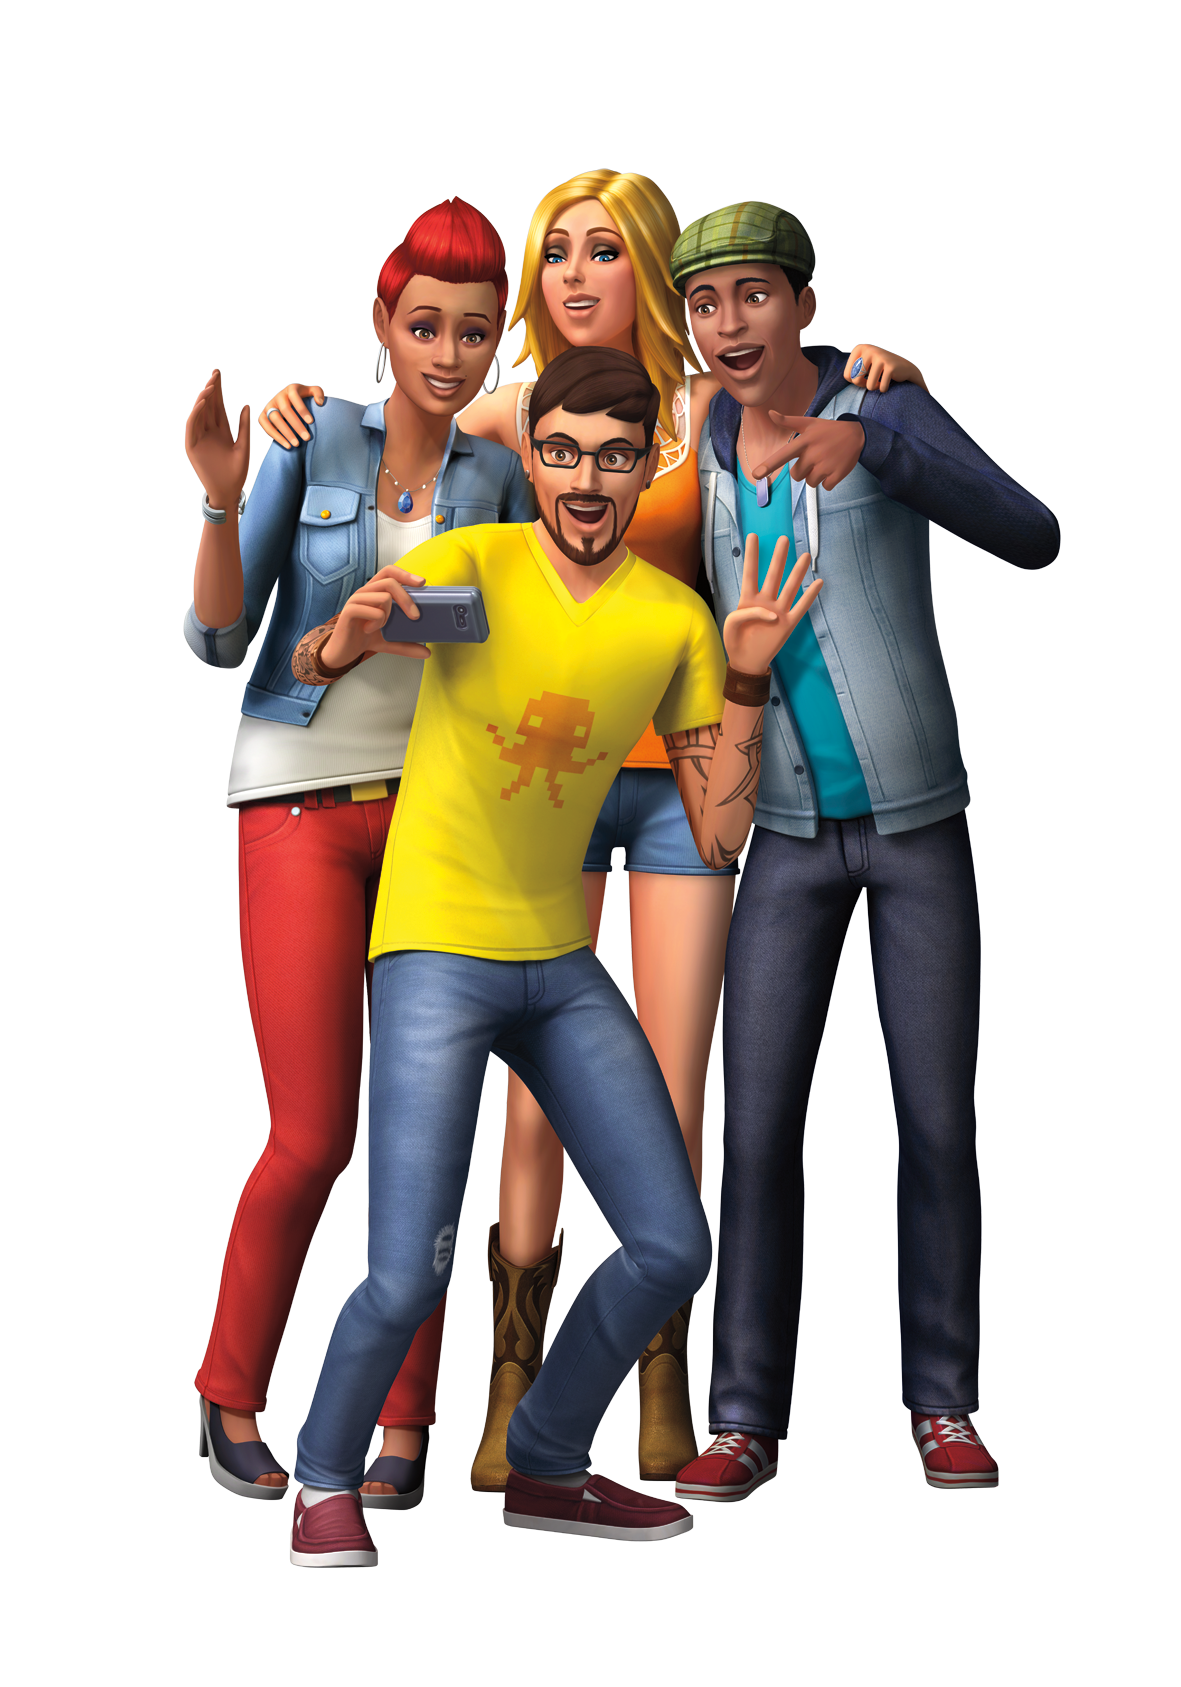 Sims The Free Download Image PNG Image